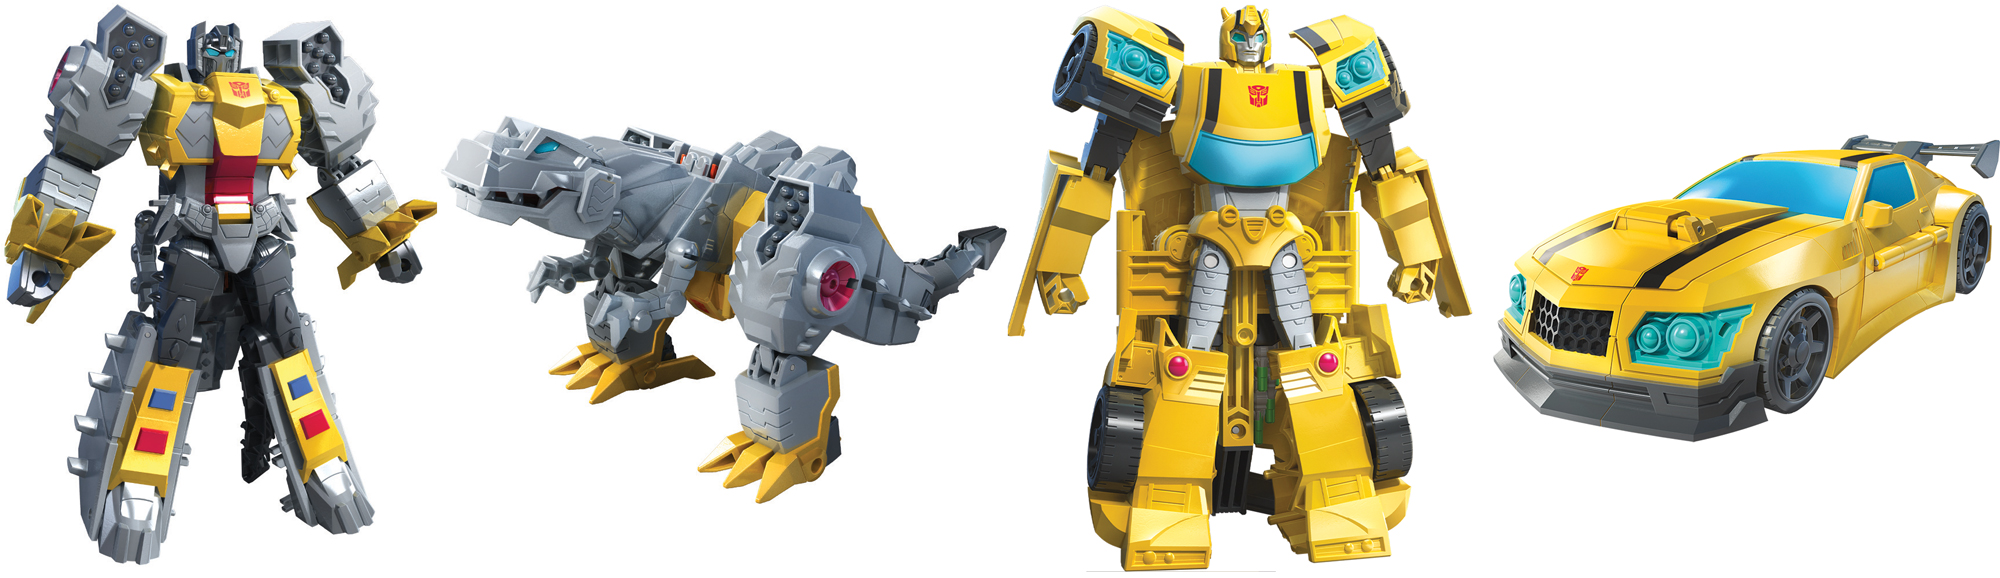 These New Transformers Cyberverse Figures Are Fantastic Callbacks To The Original ’80s Toys